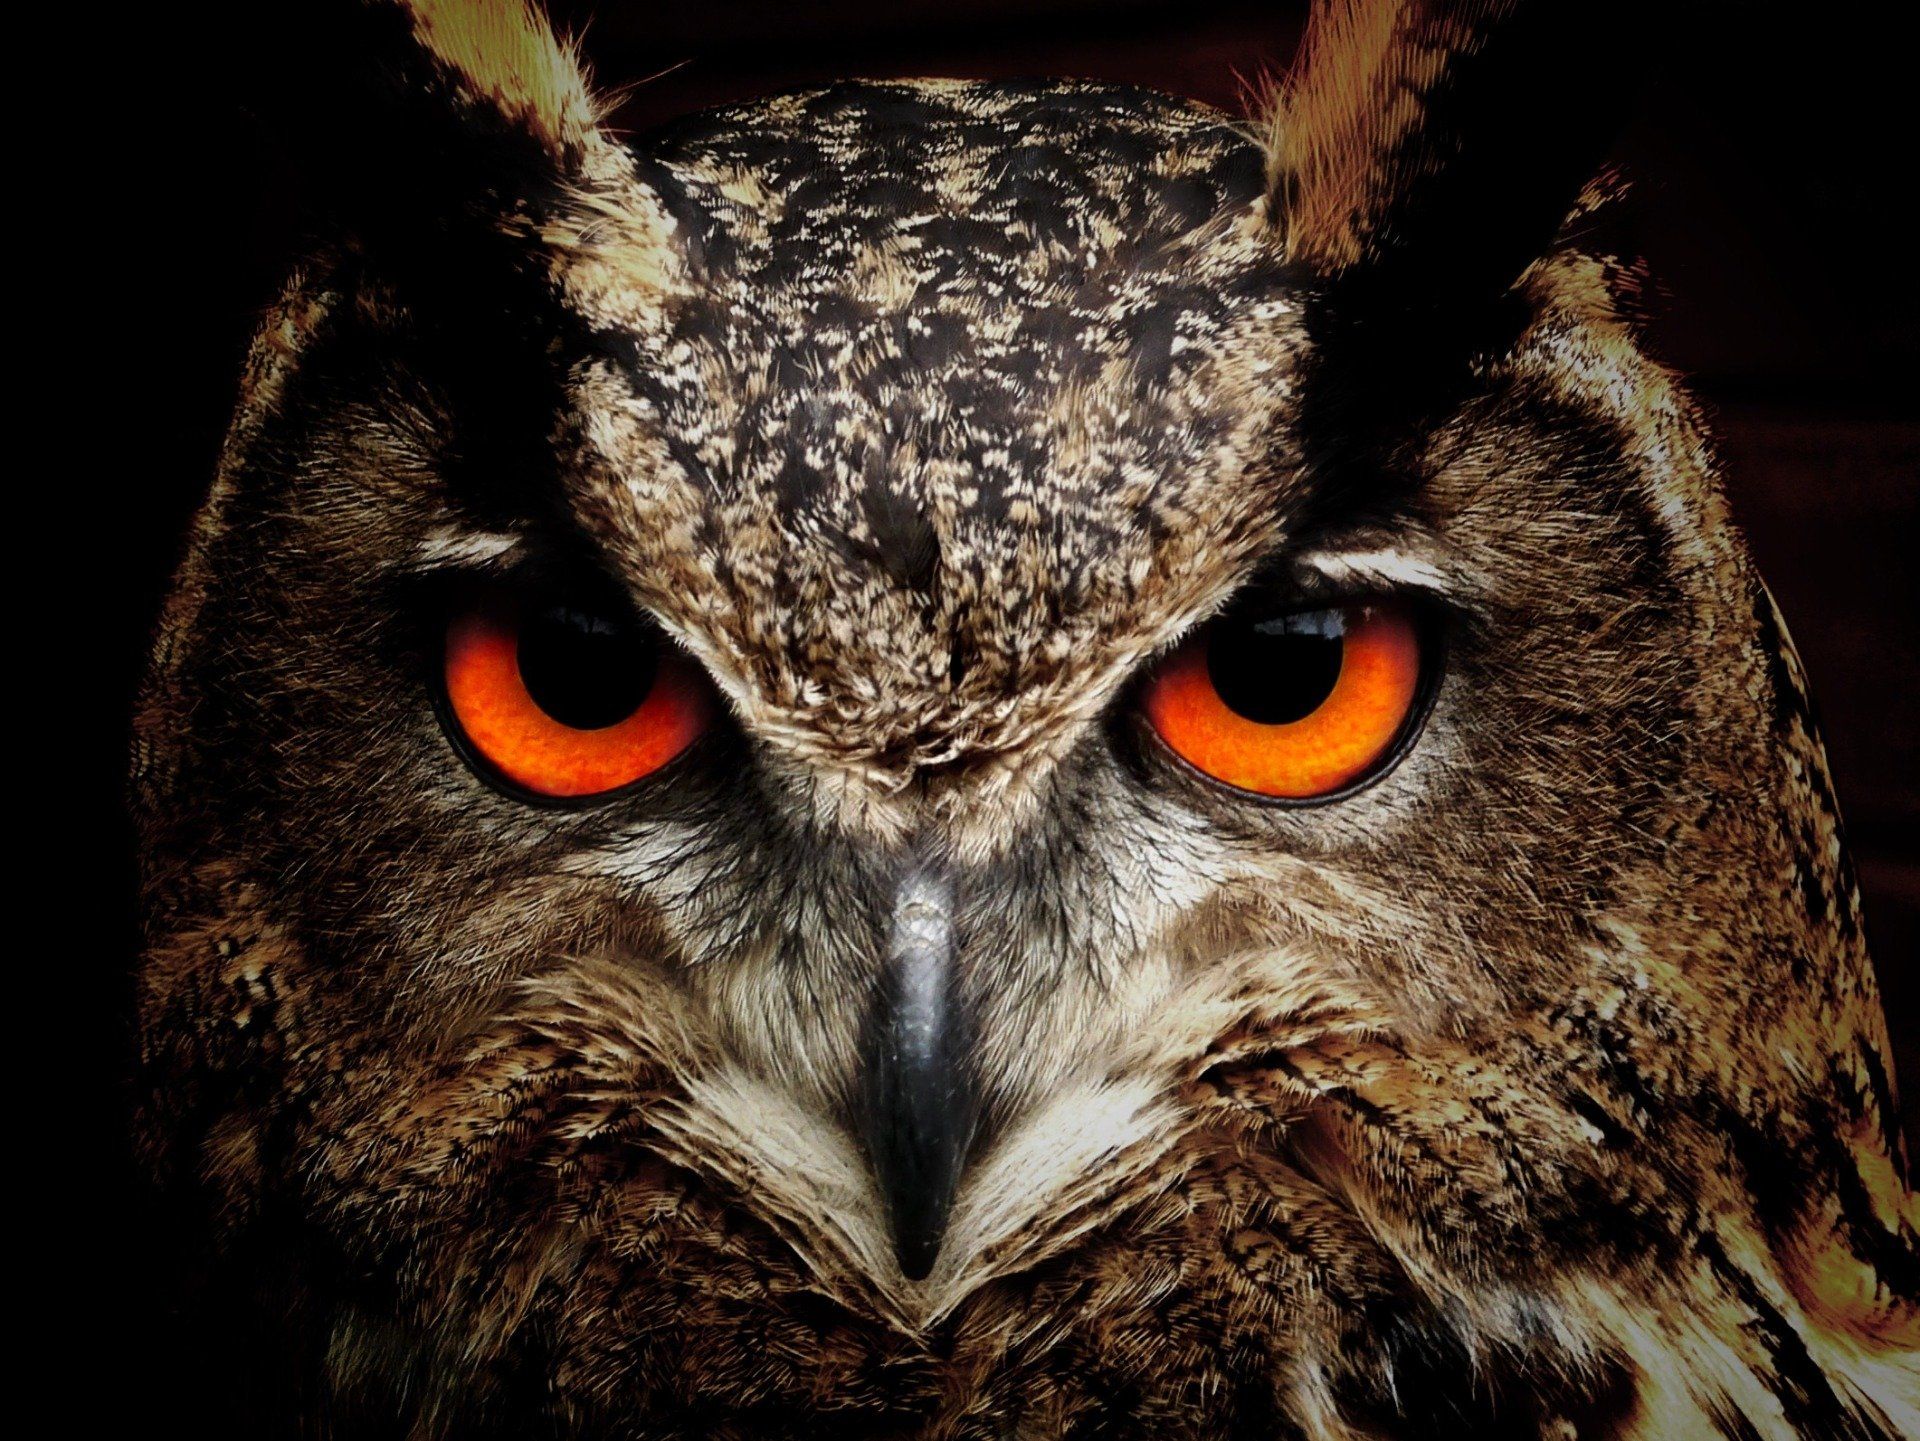 a close up of an owl 's face with orange eyes